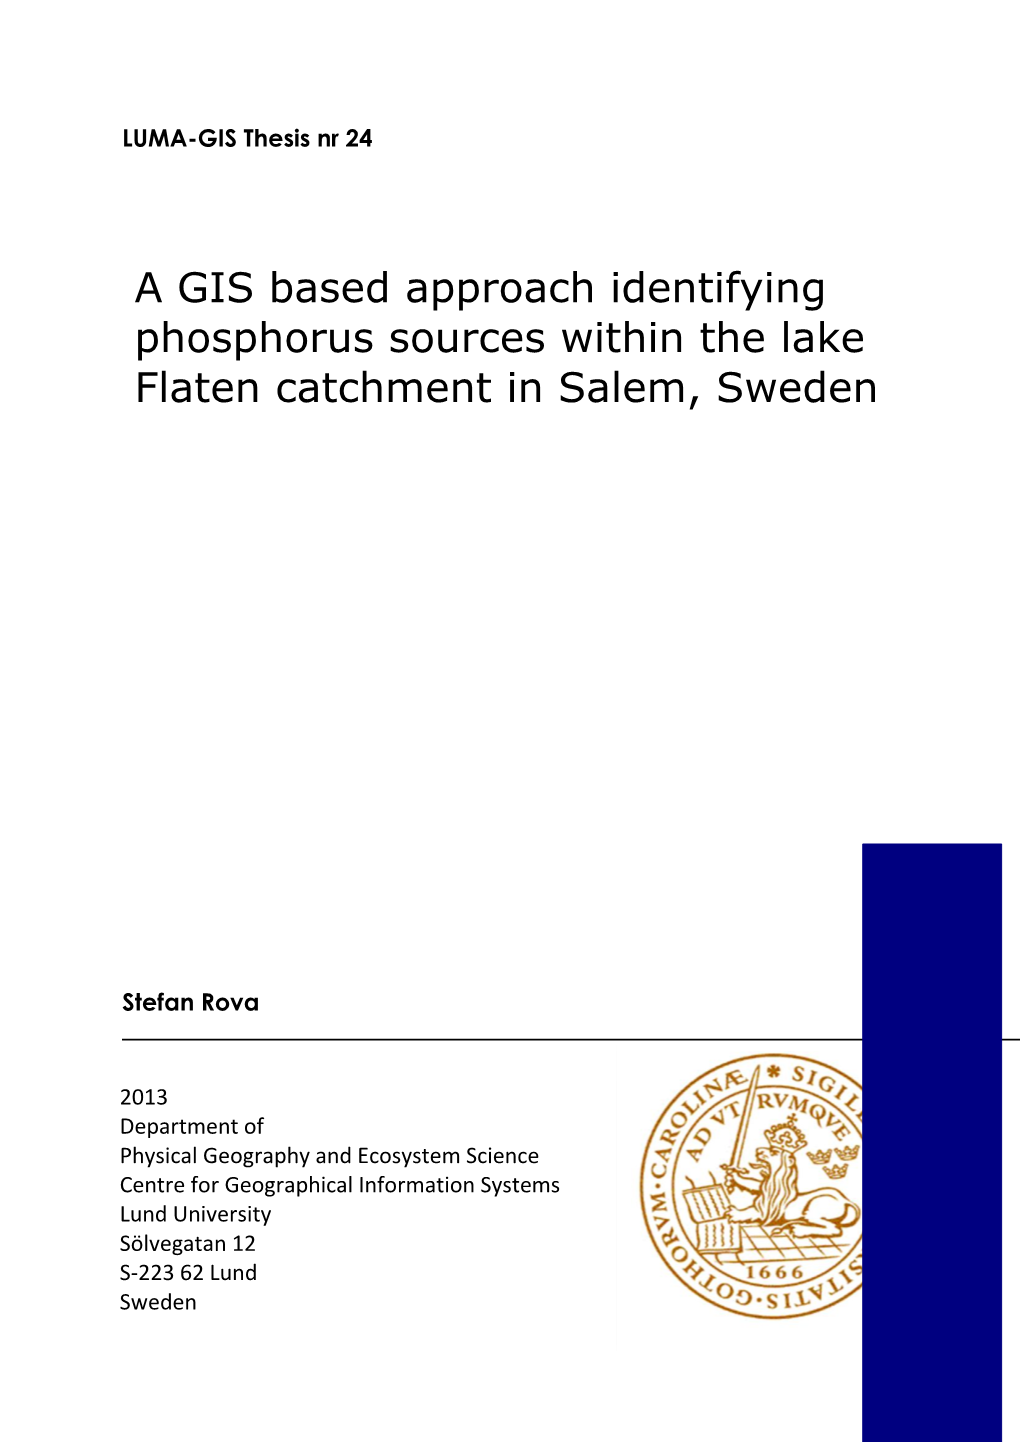 A Gis Based Approach Identifying Phosphorus Sources Within the Lake Flaten Catchment in Salem, Sweden